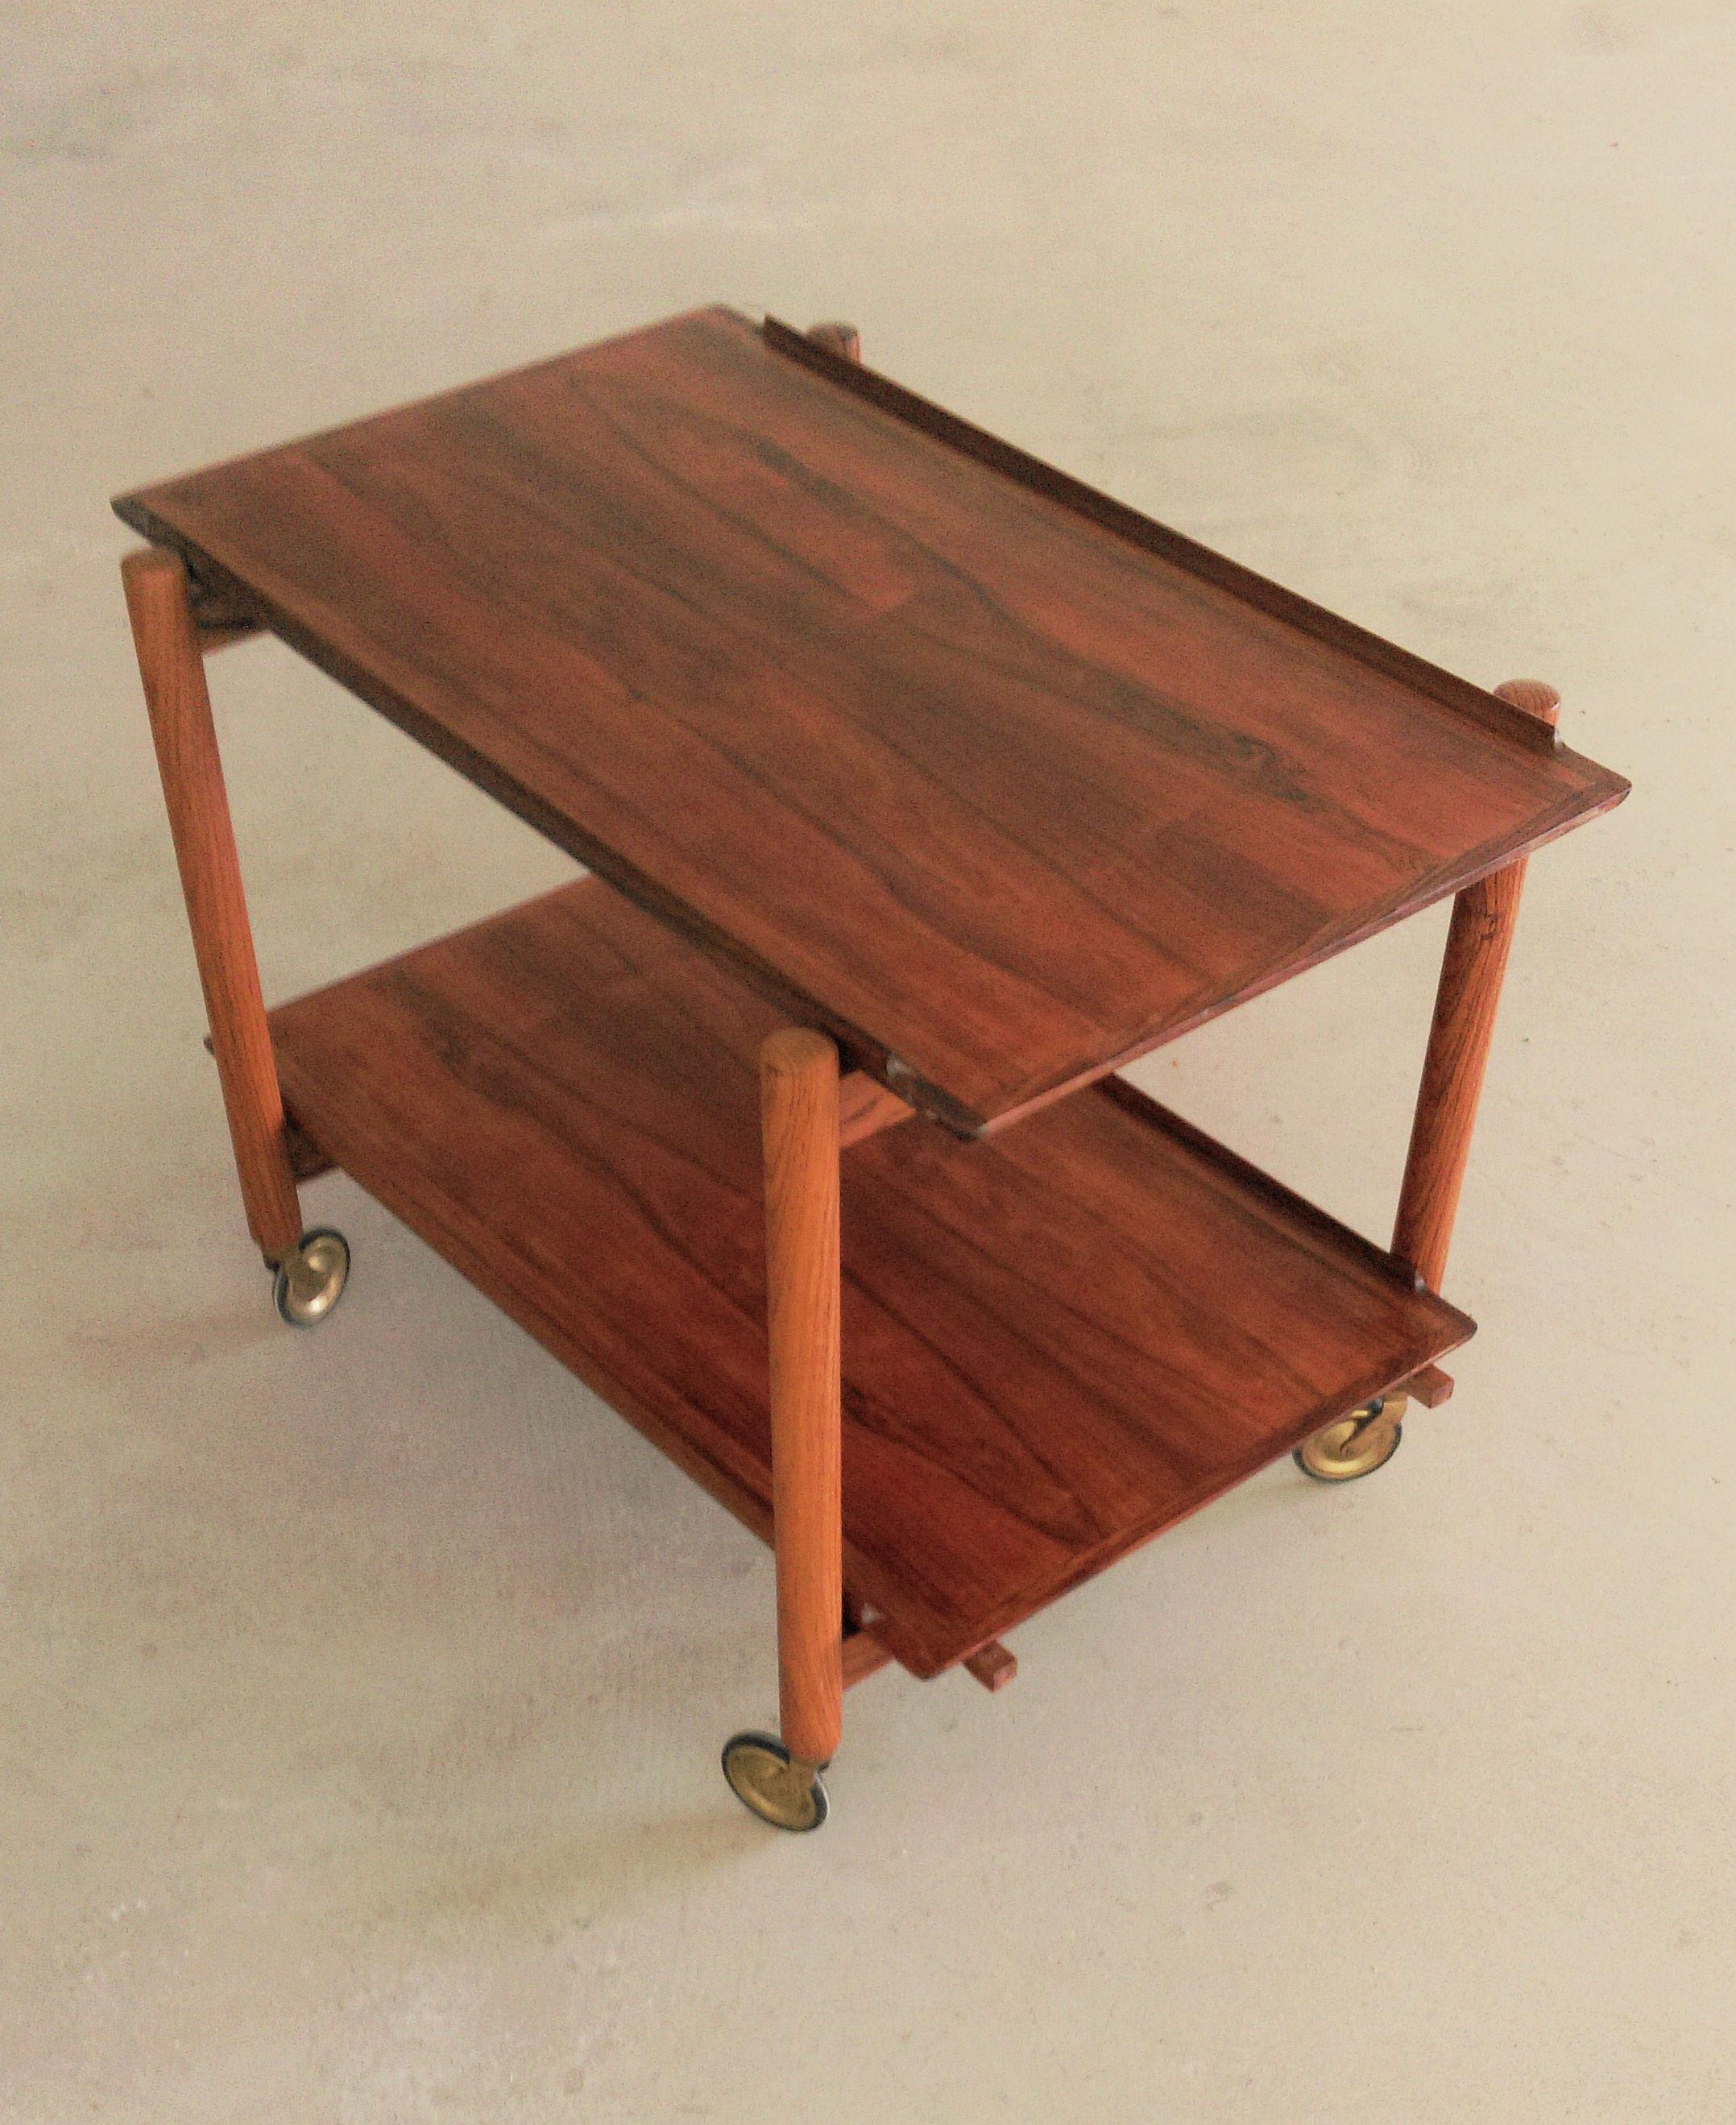 1960s Poul Hundevad Danish modular two-tiered rosewood bar cart

The flexible bar table features a unique combination of organic shapes, excellent craftsmanship and a very flexible design that enables the four wheeled table to be used for numerous